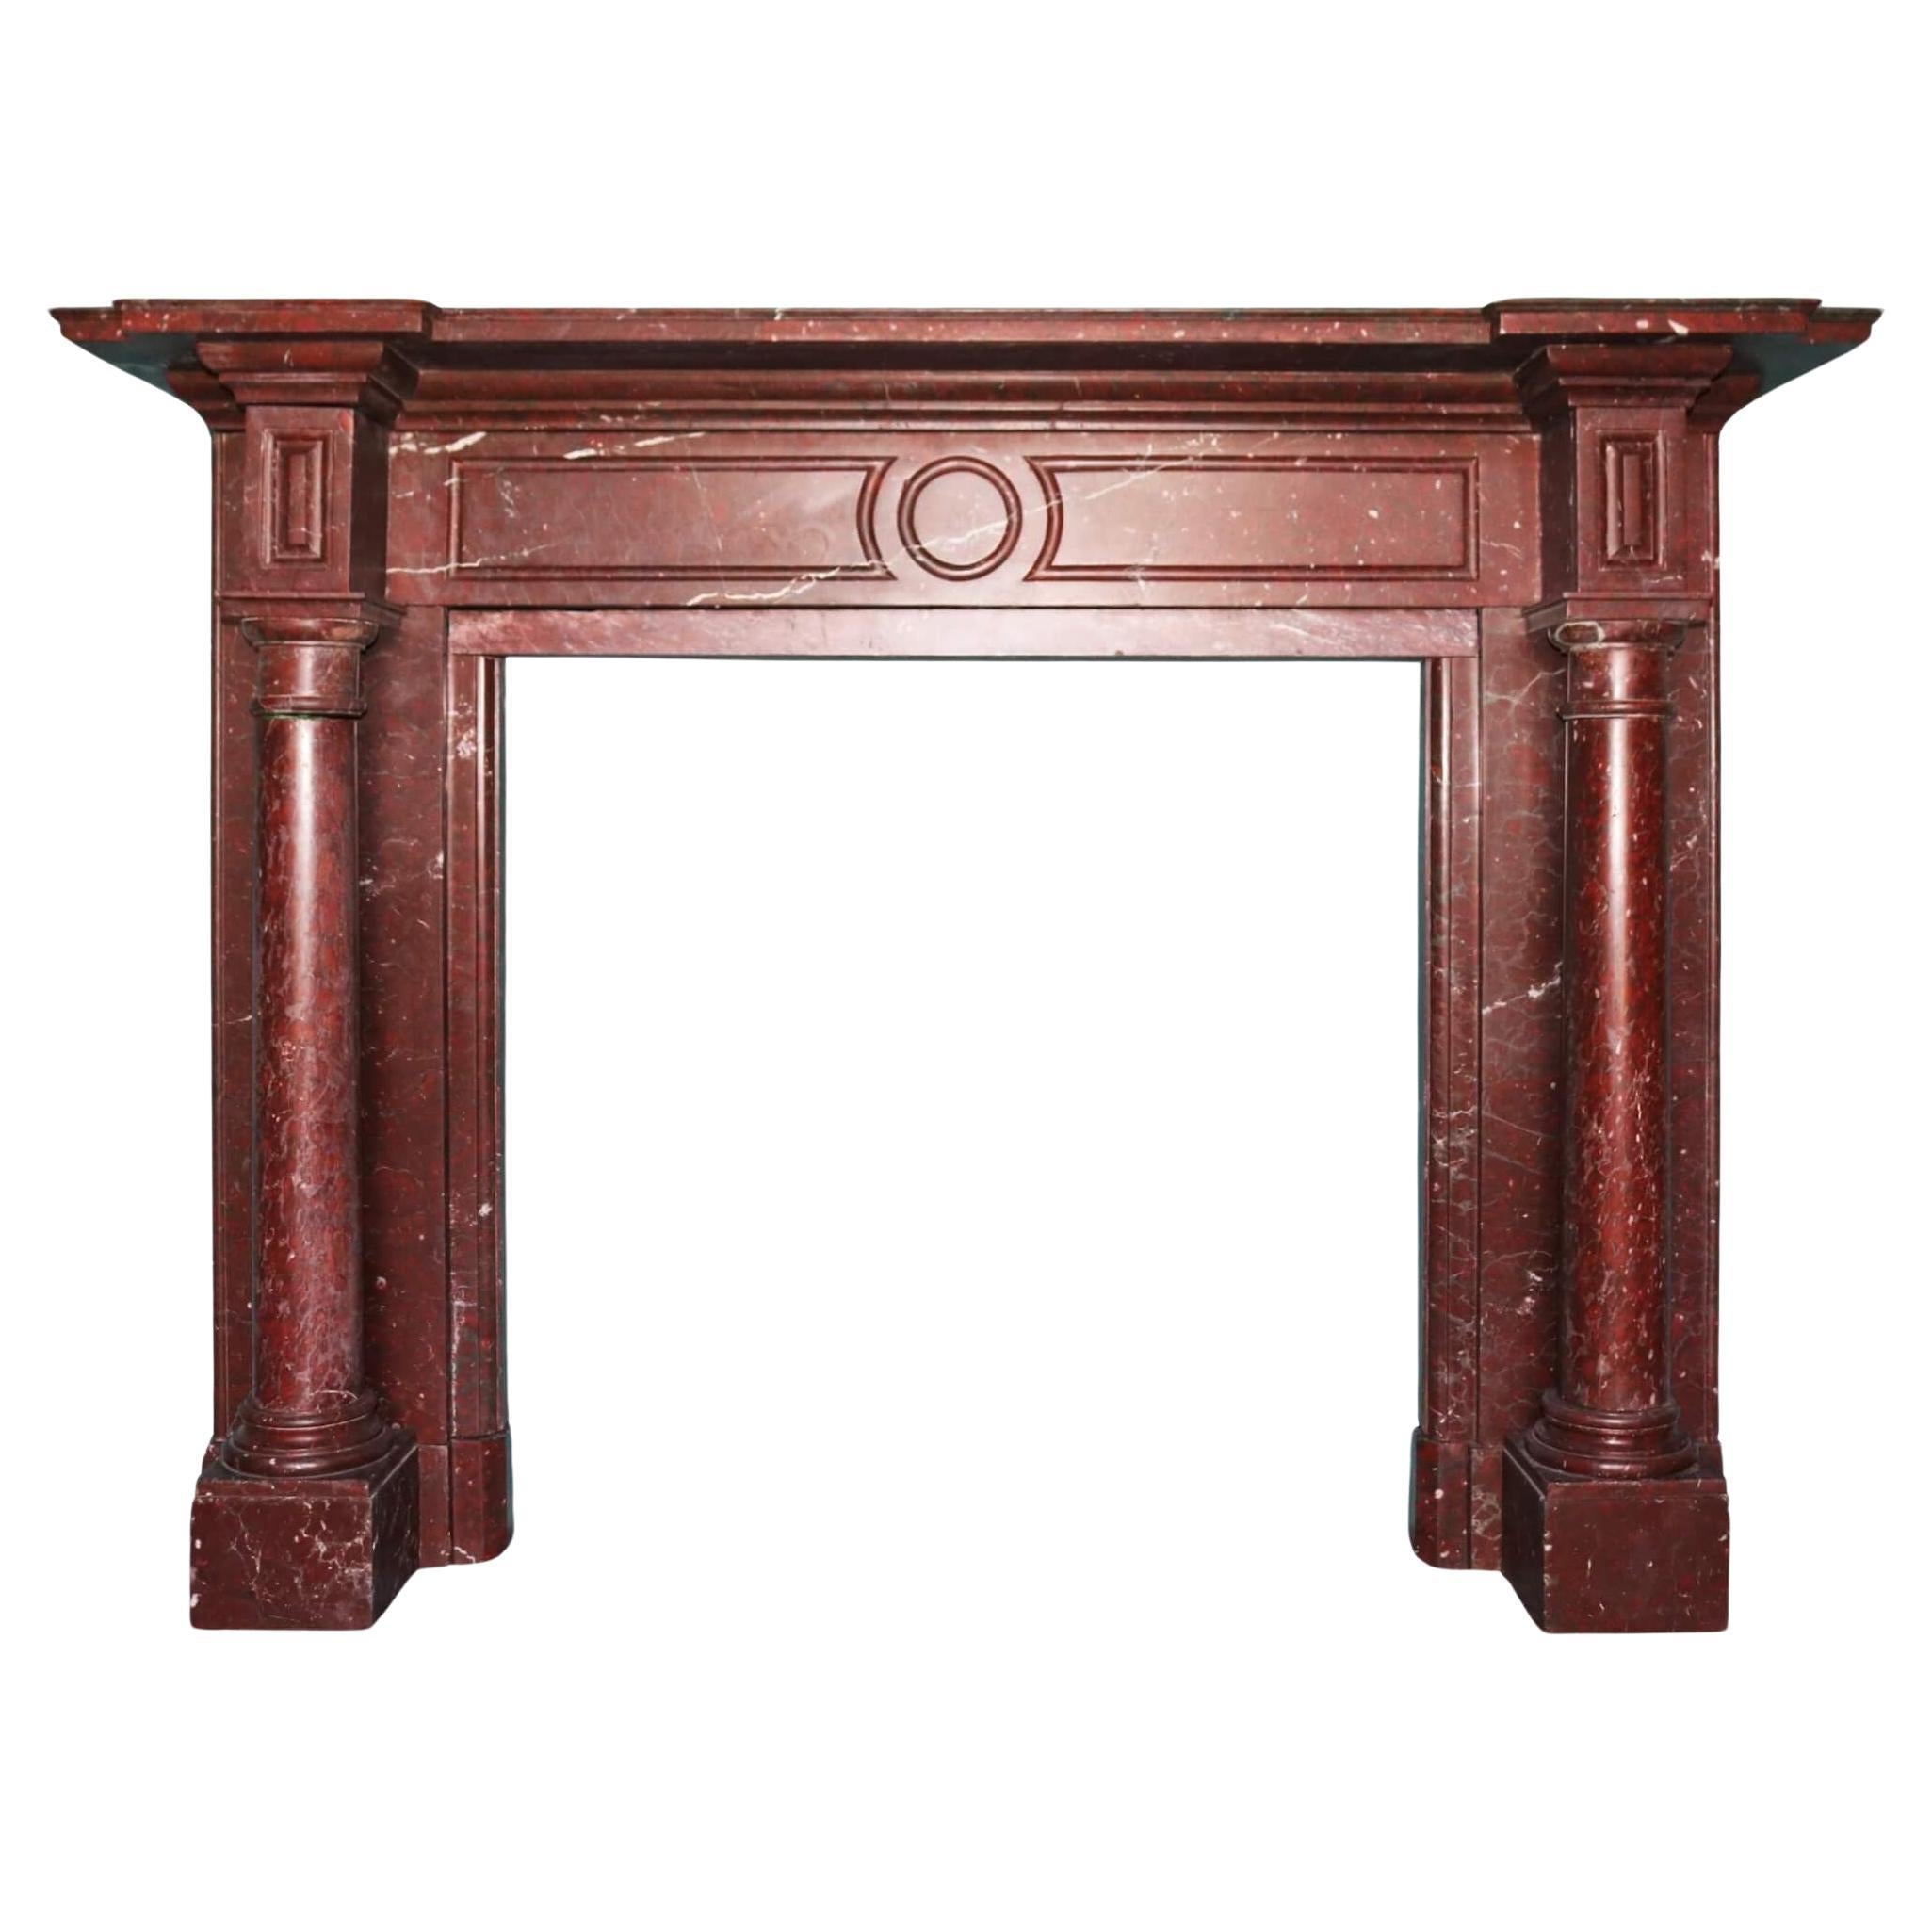 Antique French Rouge Griotte Marble Fire Mantel